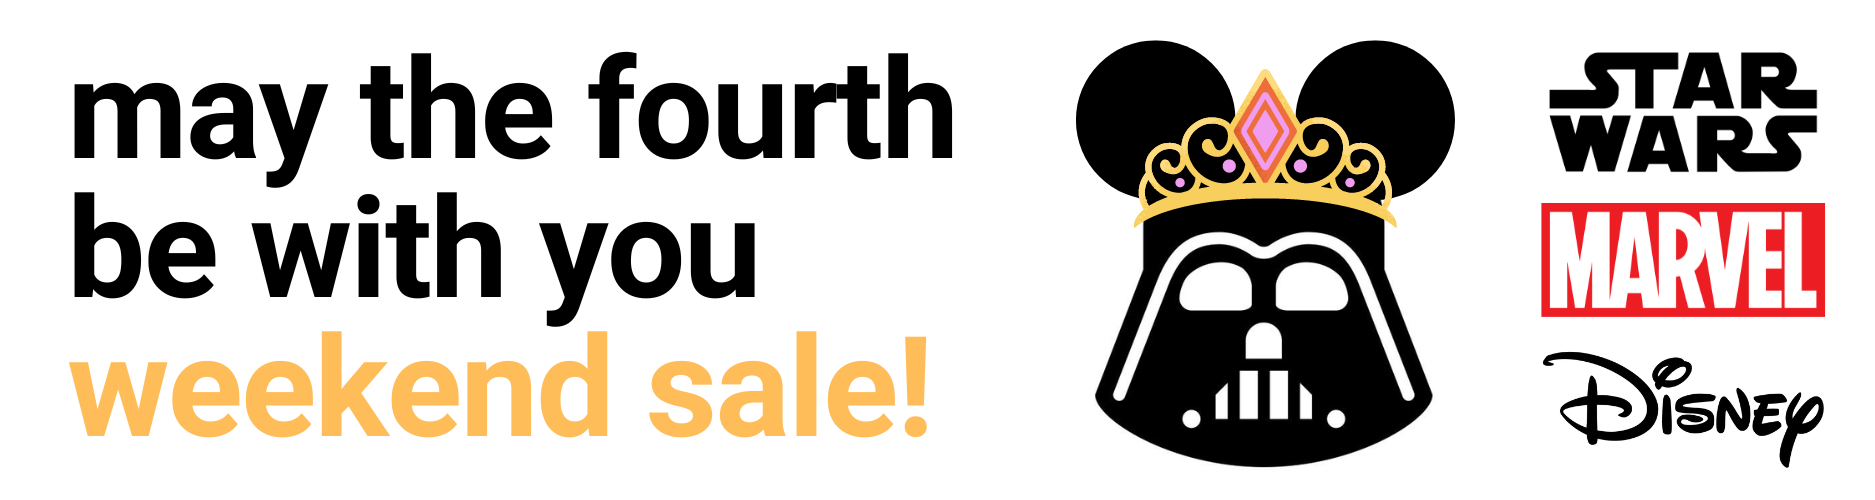 Star Wars and other Disney products on sale this weekend